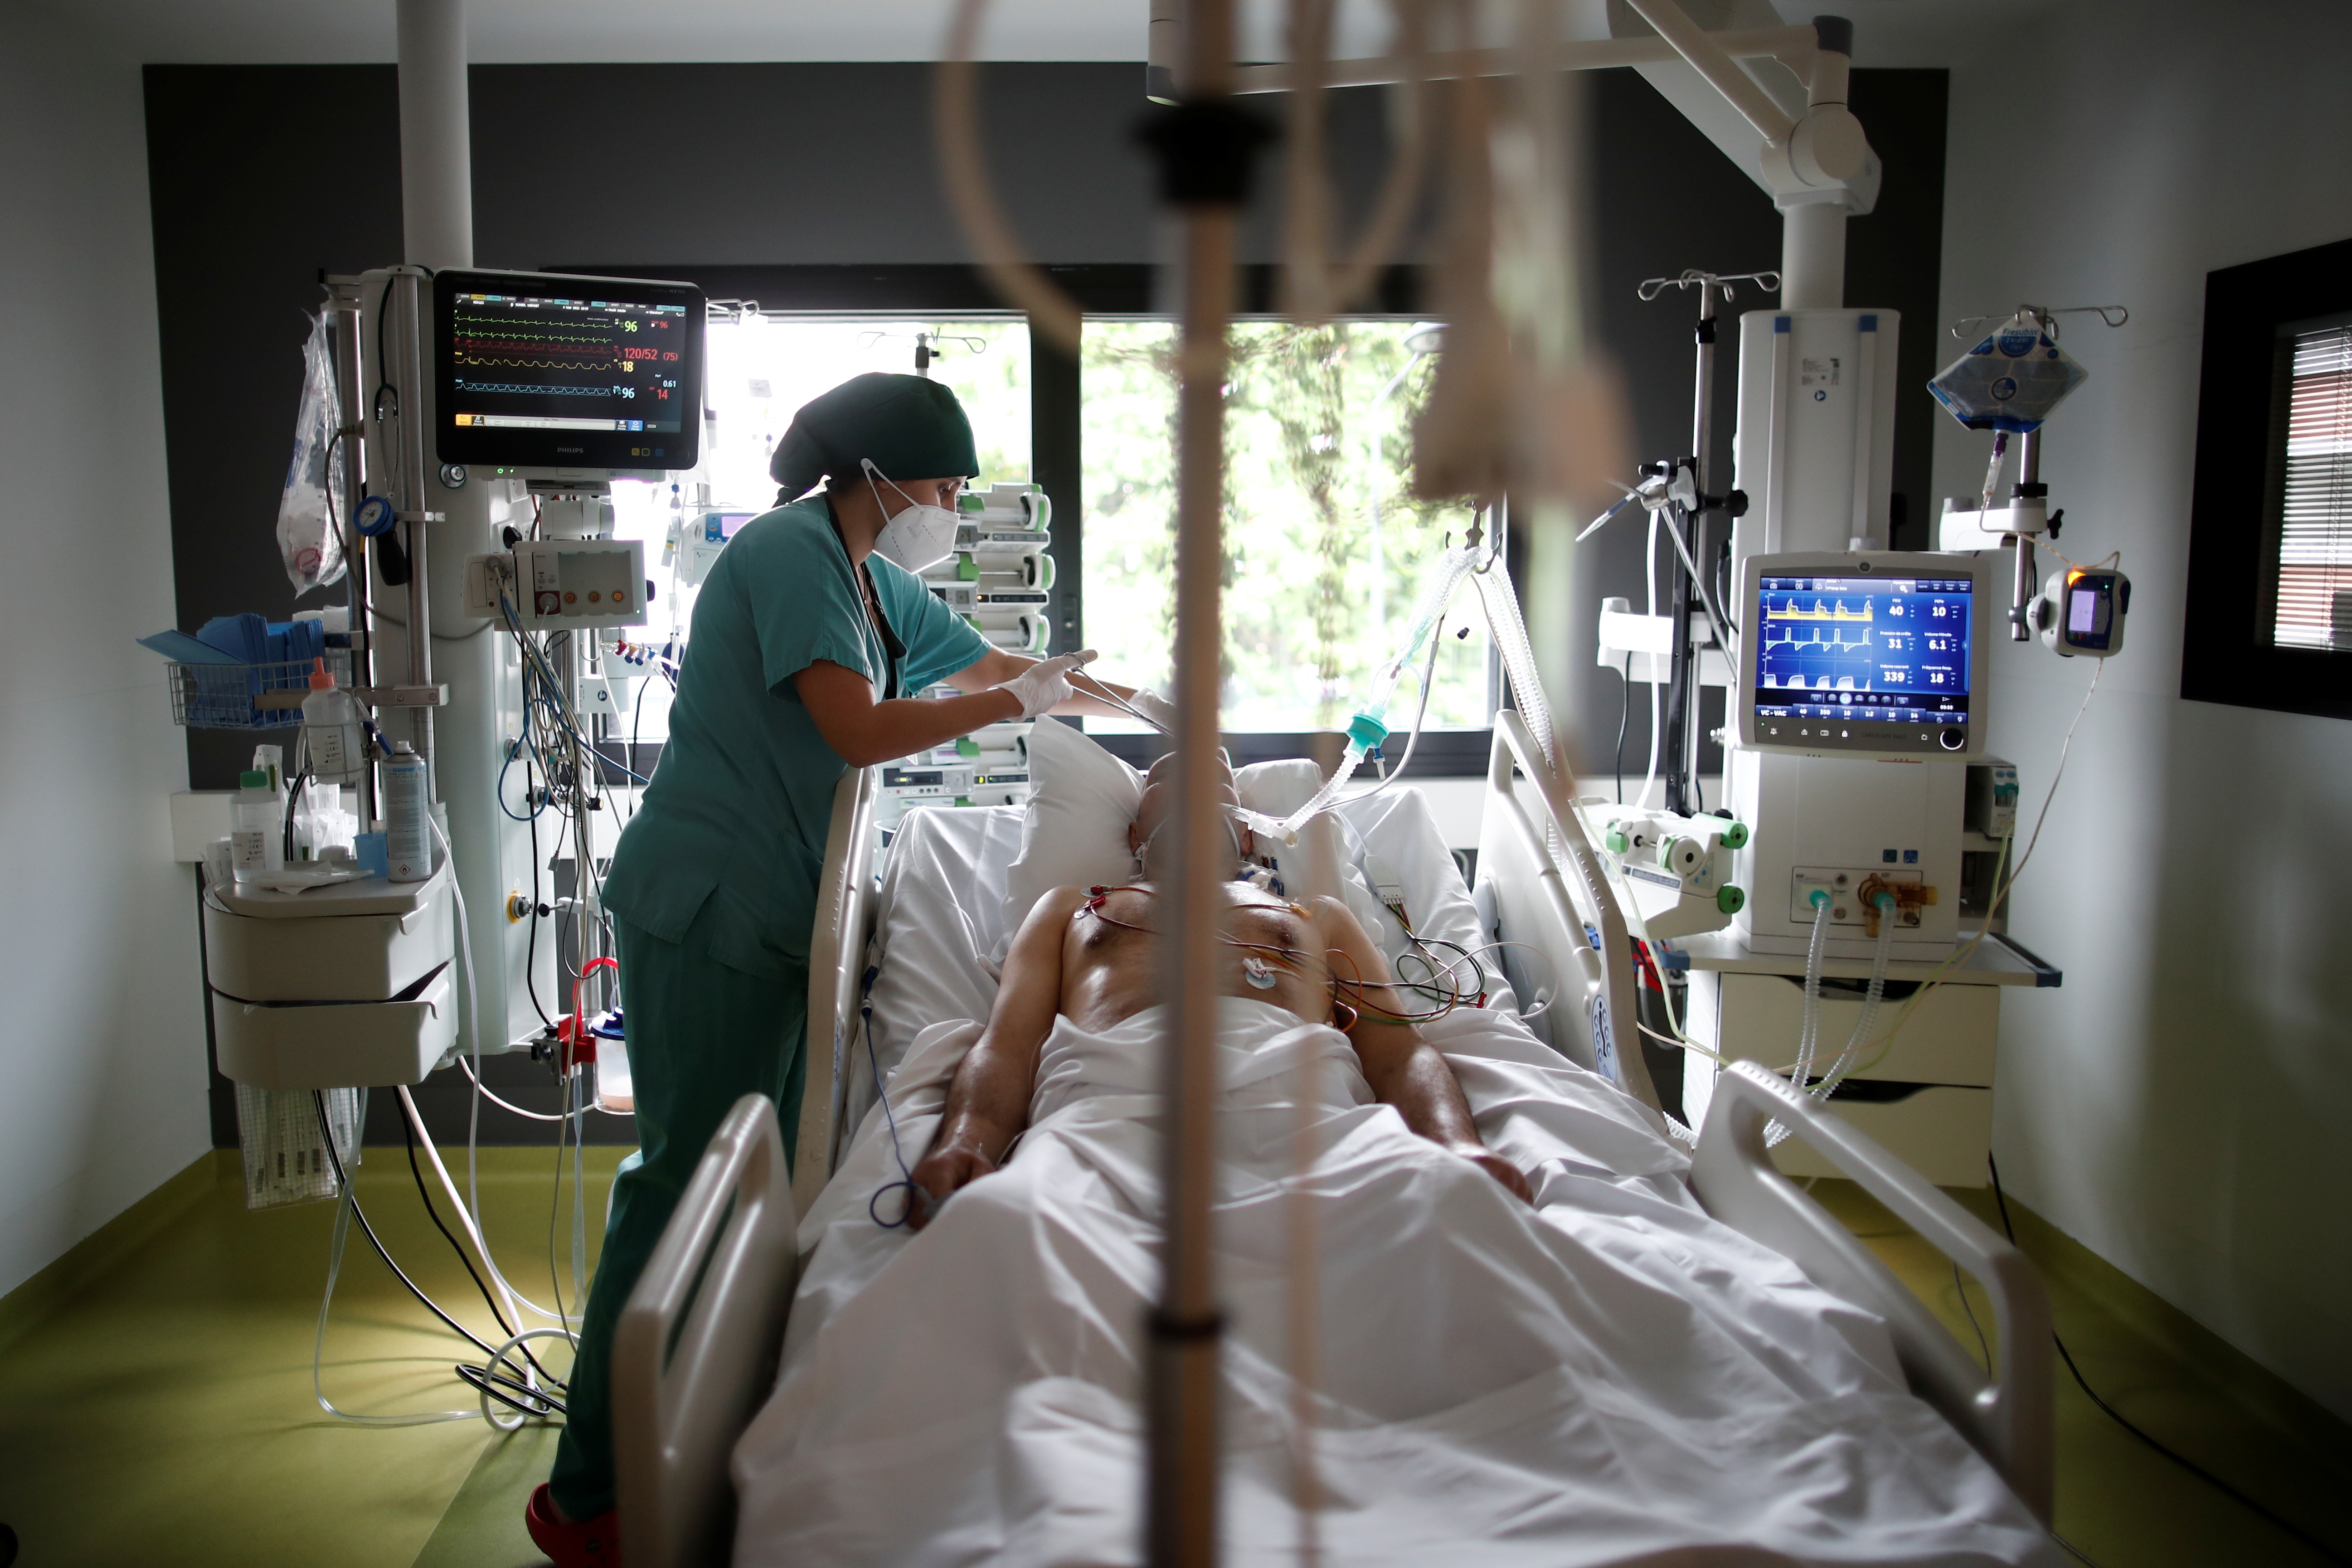 A healthcare worker provides care for a COVID-19 patient in the Intensive Care Unit (ICU) at the Centre Cardiologique du Nord private hospital in Saint-Denis, near Paris, amid the coronavirus disease pandemic in France, May 4, 2021. REUTERS/Benoit Tessier